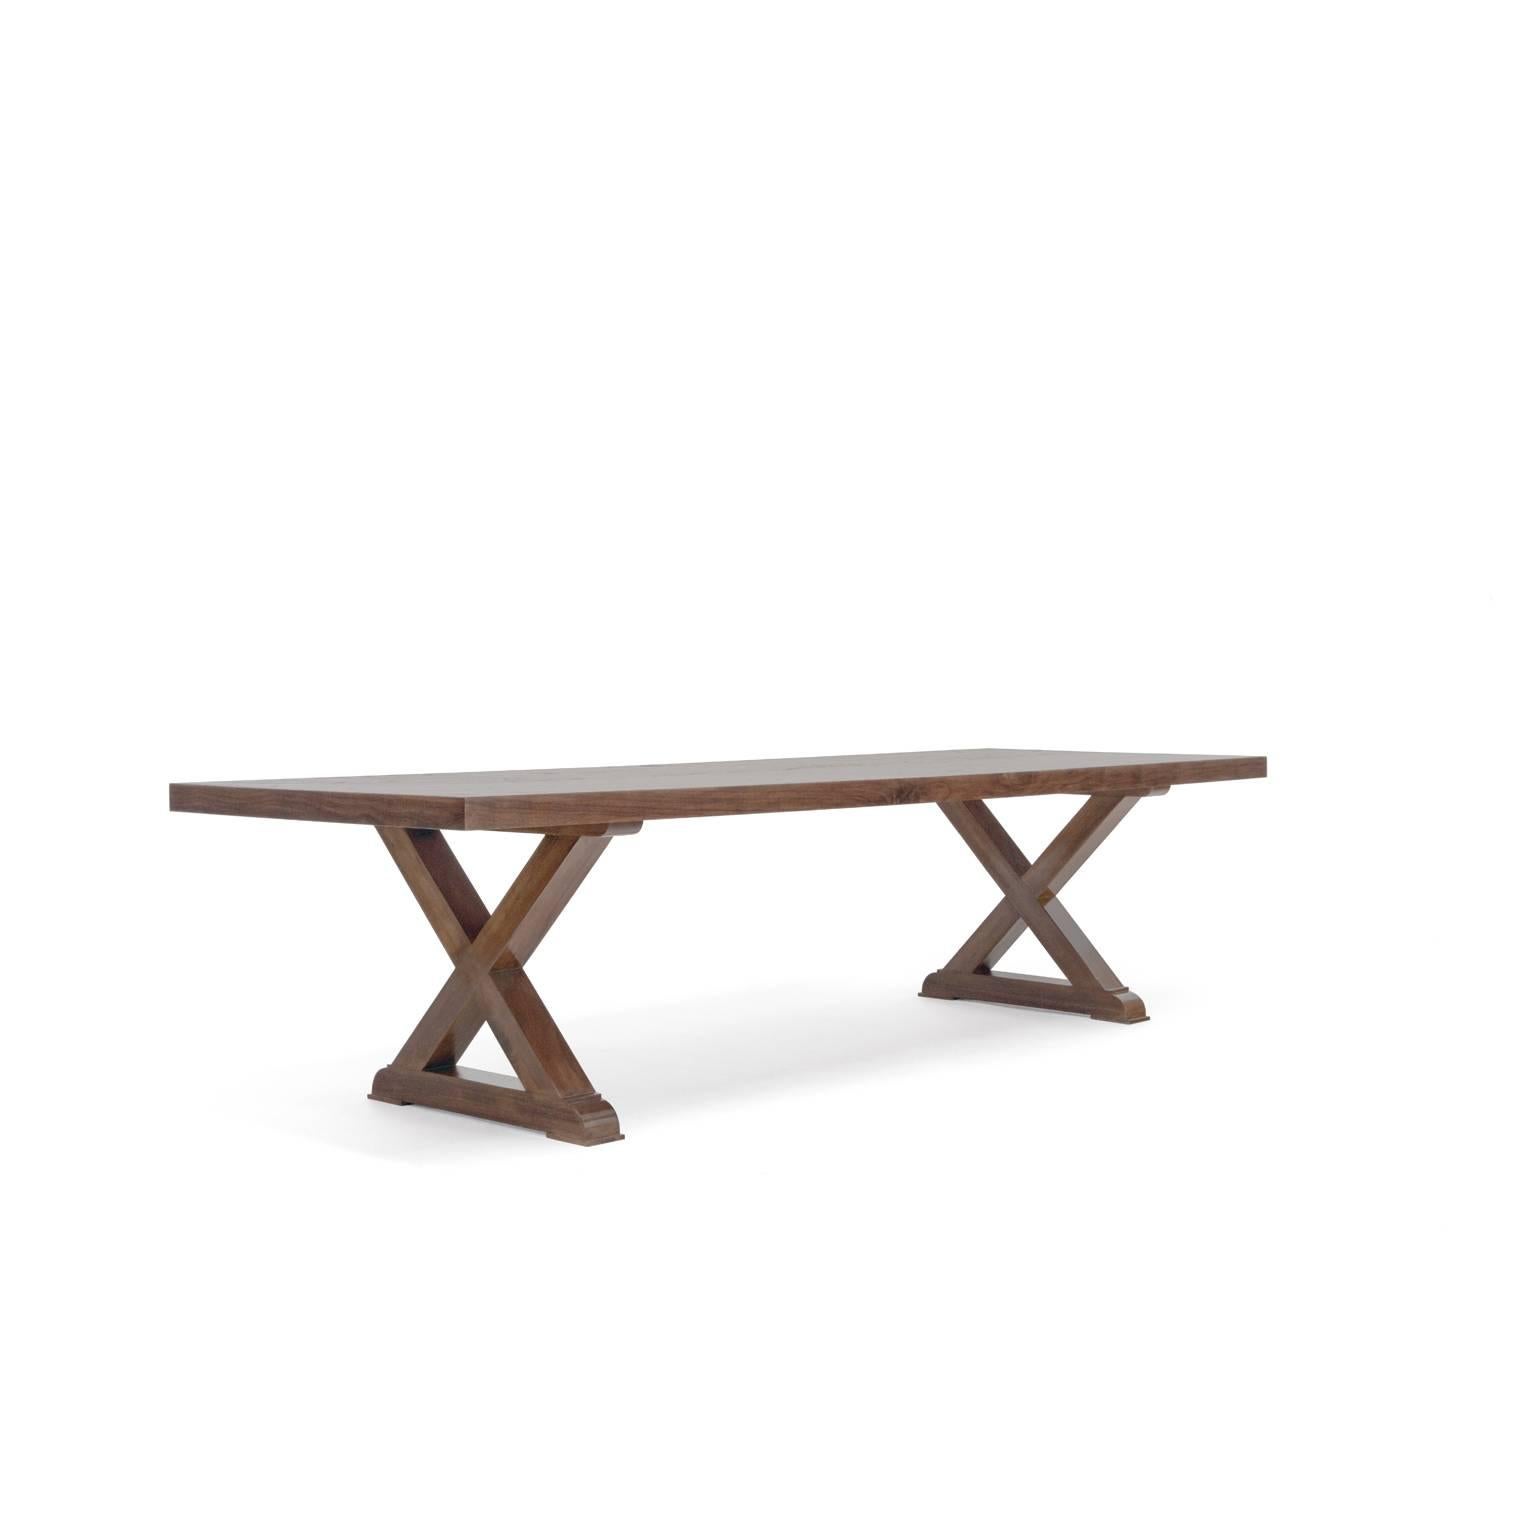 Atelier Demiurge Collection Normandy Dining Table shown with an inset 19th c. walnut top in provence finish. Inquire for finish and extension options.

Atelier Demiurge Collection pieces are made to order, and custom sizes are available. Please